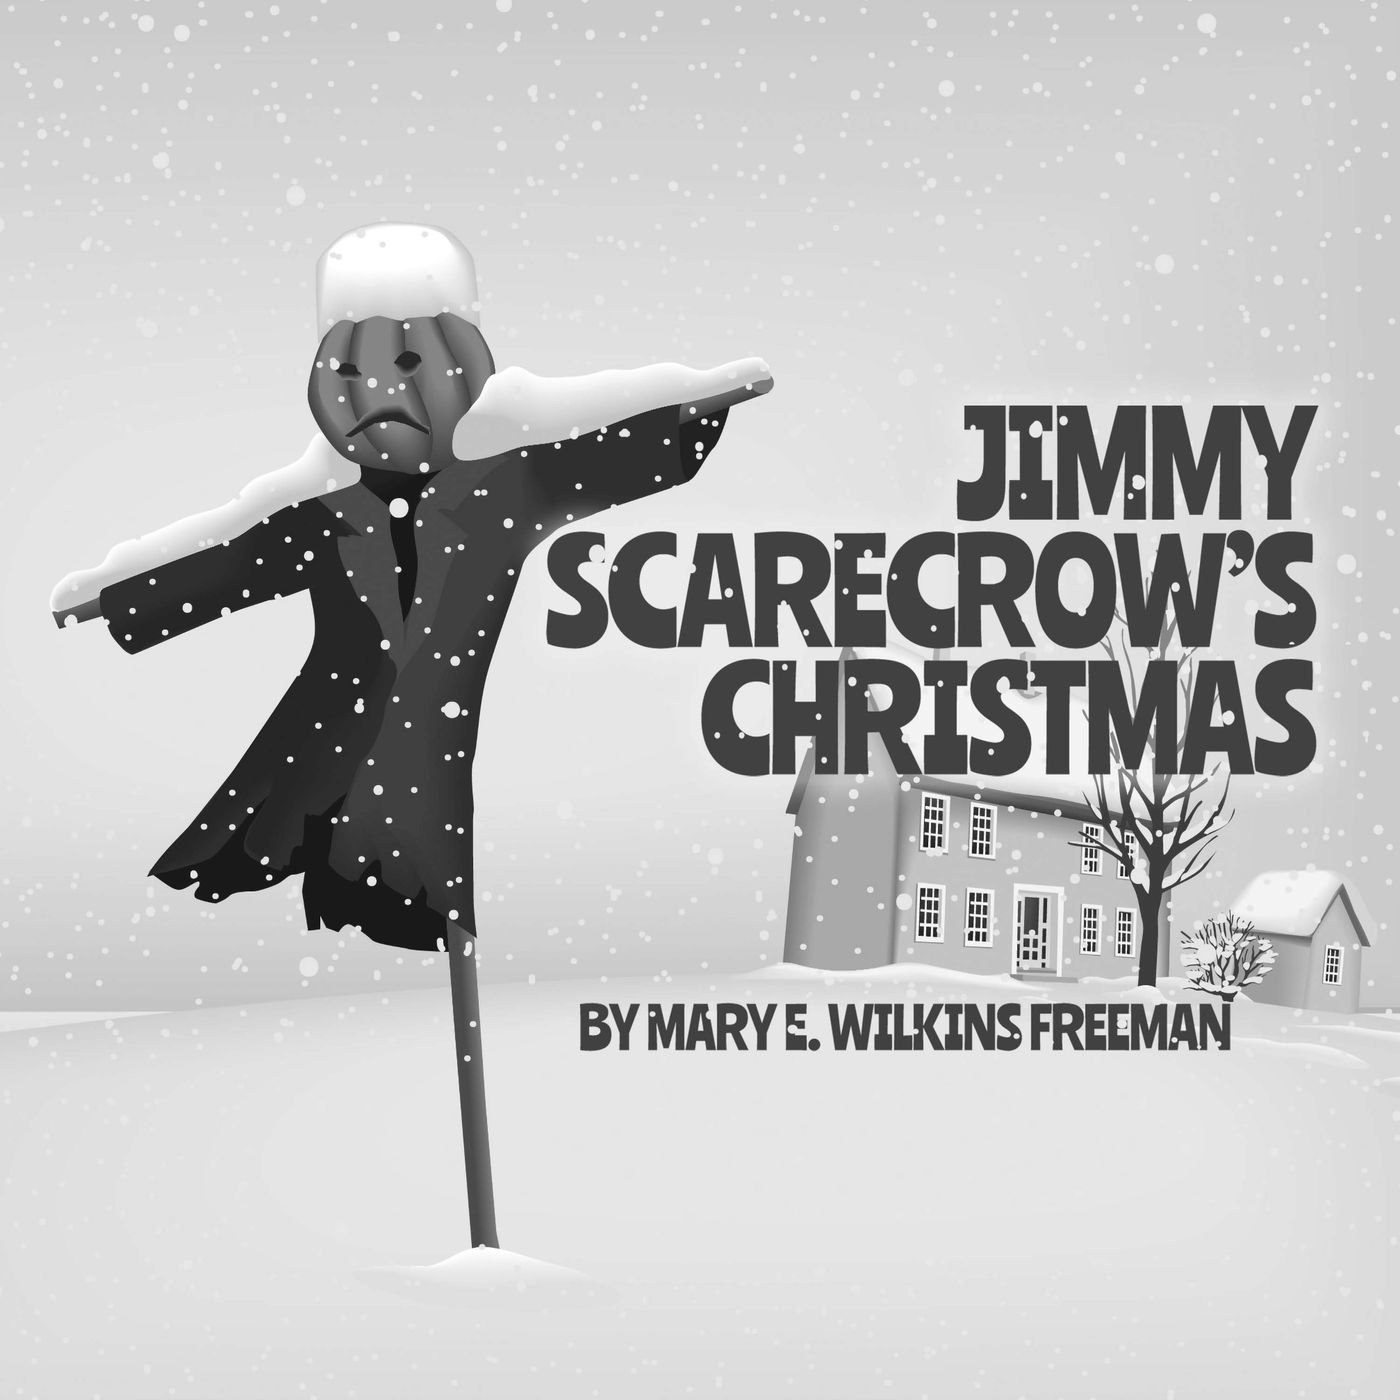 Jimmy Scarecrow’s Christmas by Mary E. Wilkins Freeman